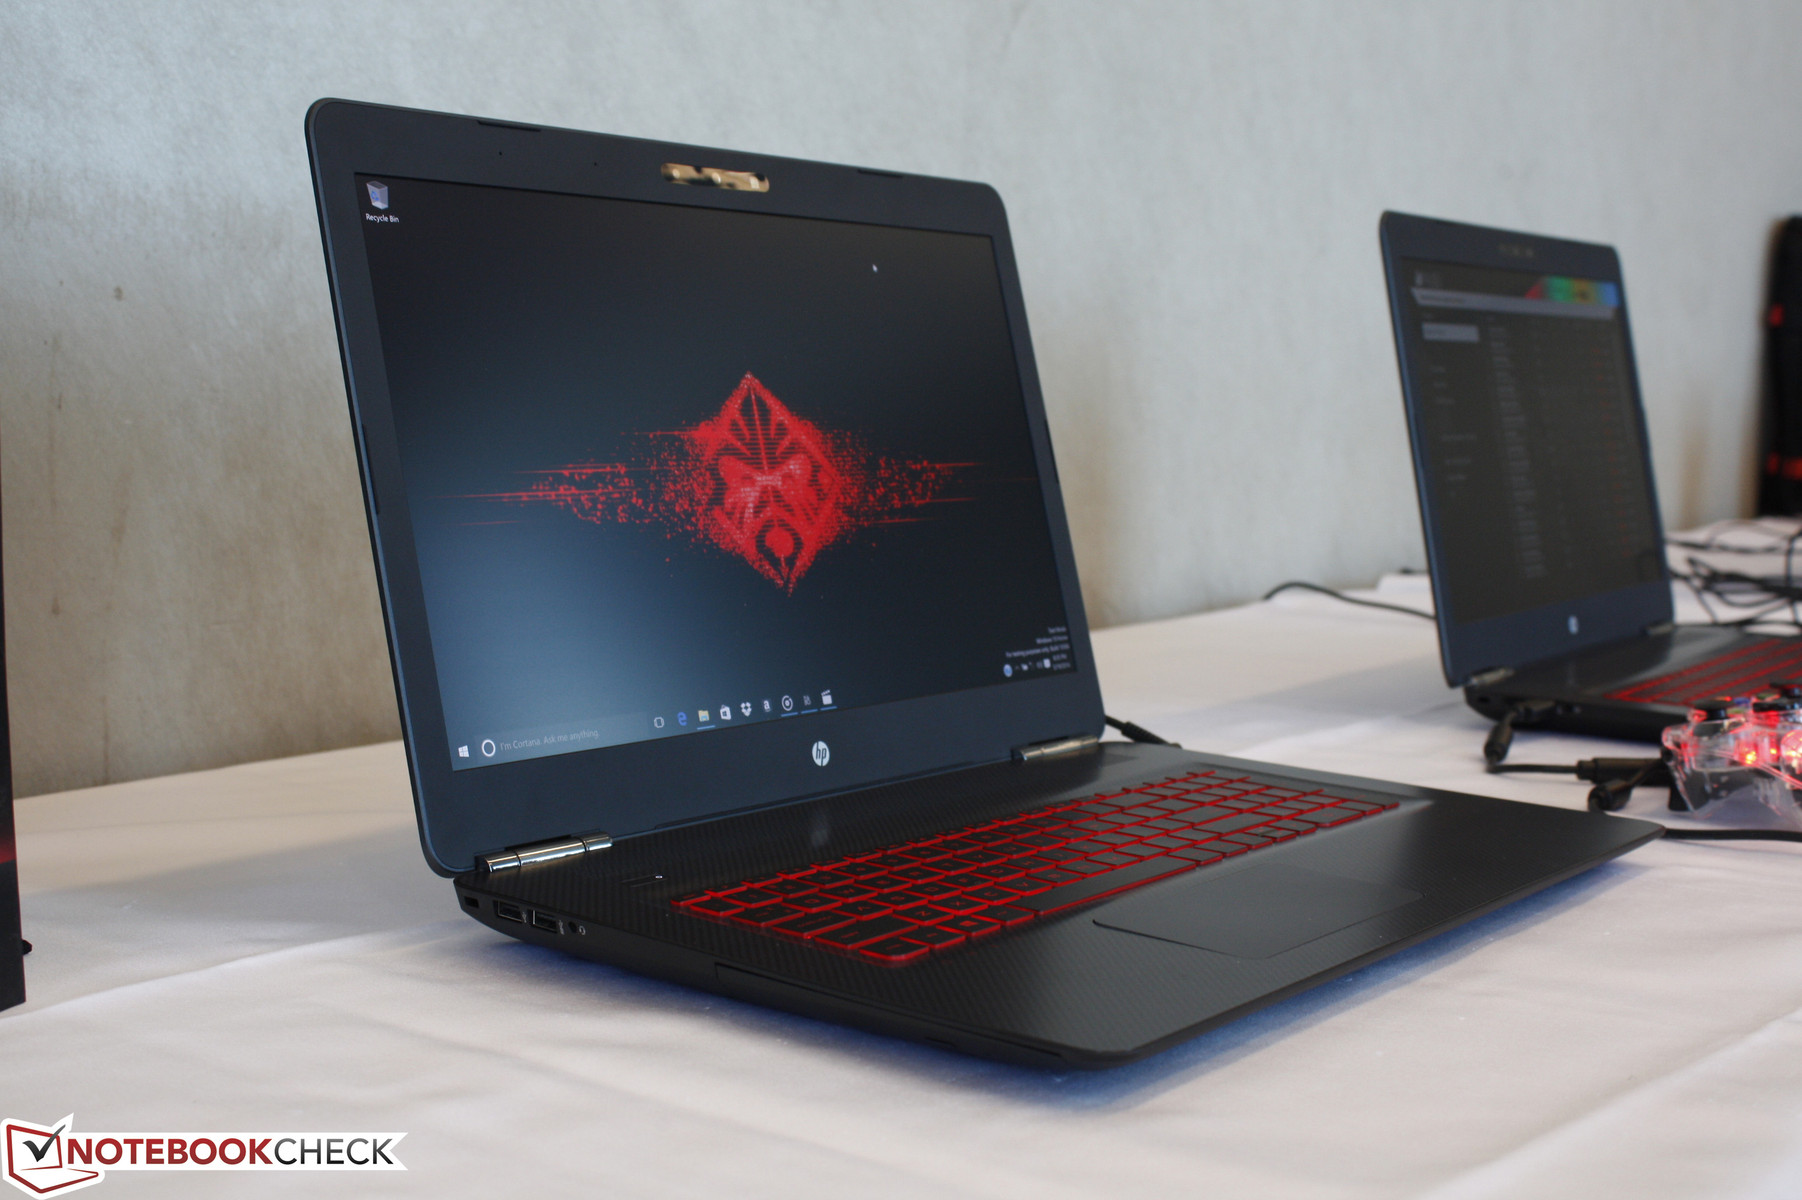 HP expands Omen gaming lineup with GTX 965M and 4K UHD options - NotebookCheck.net News